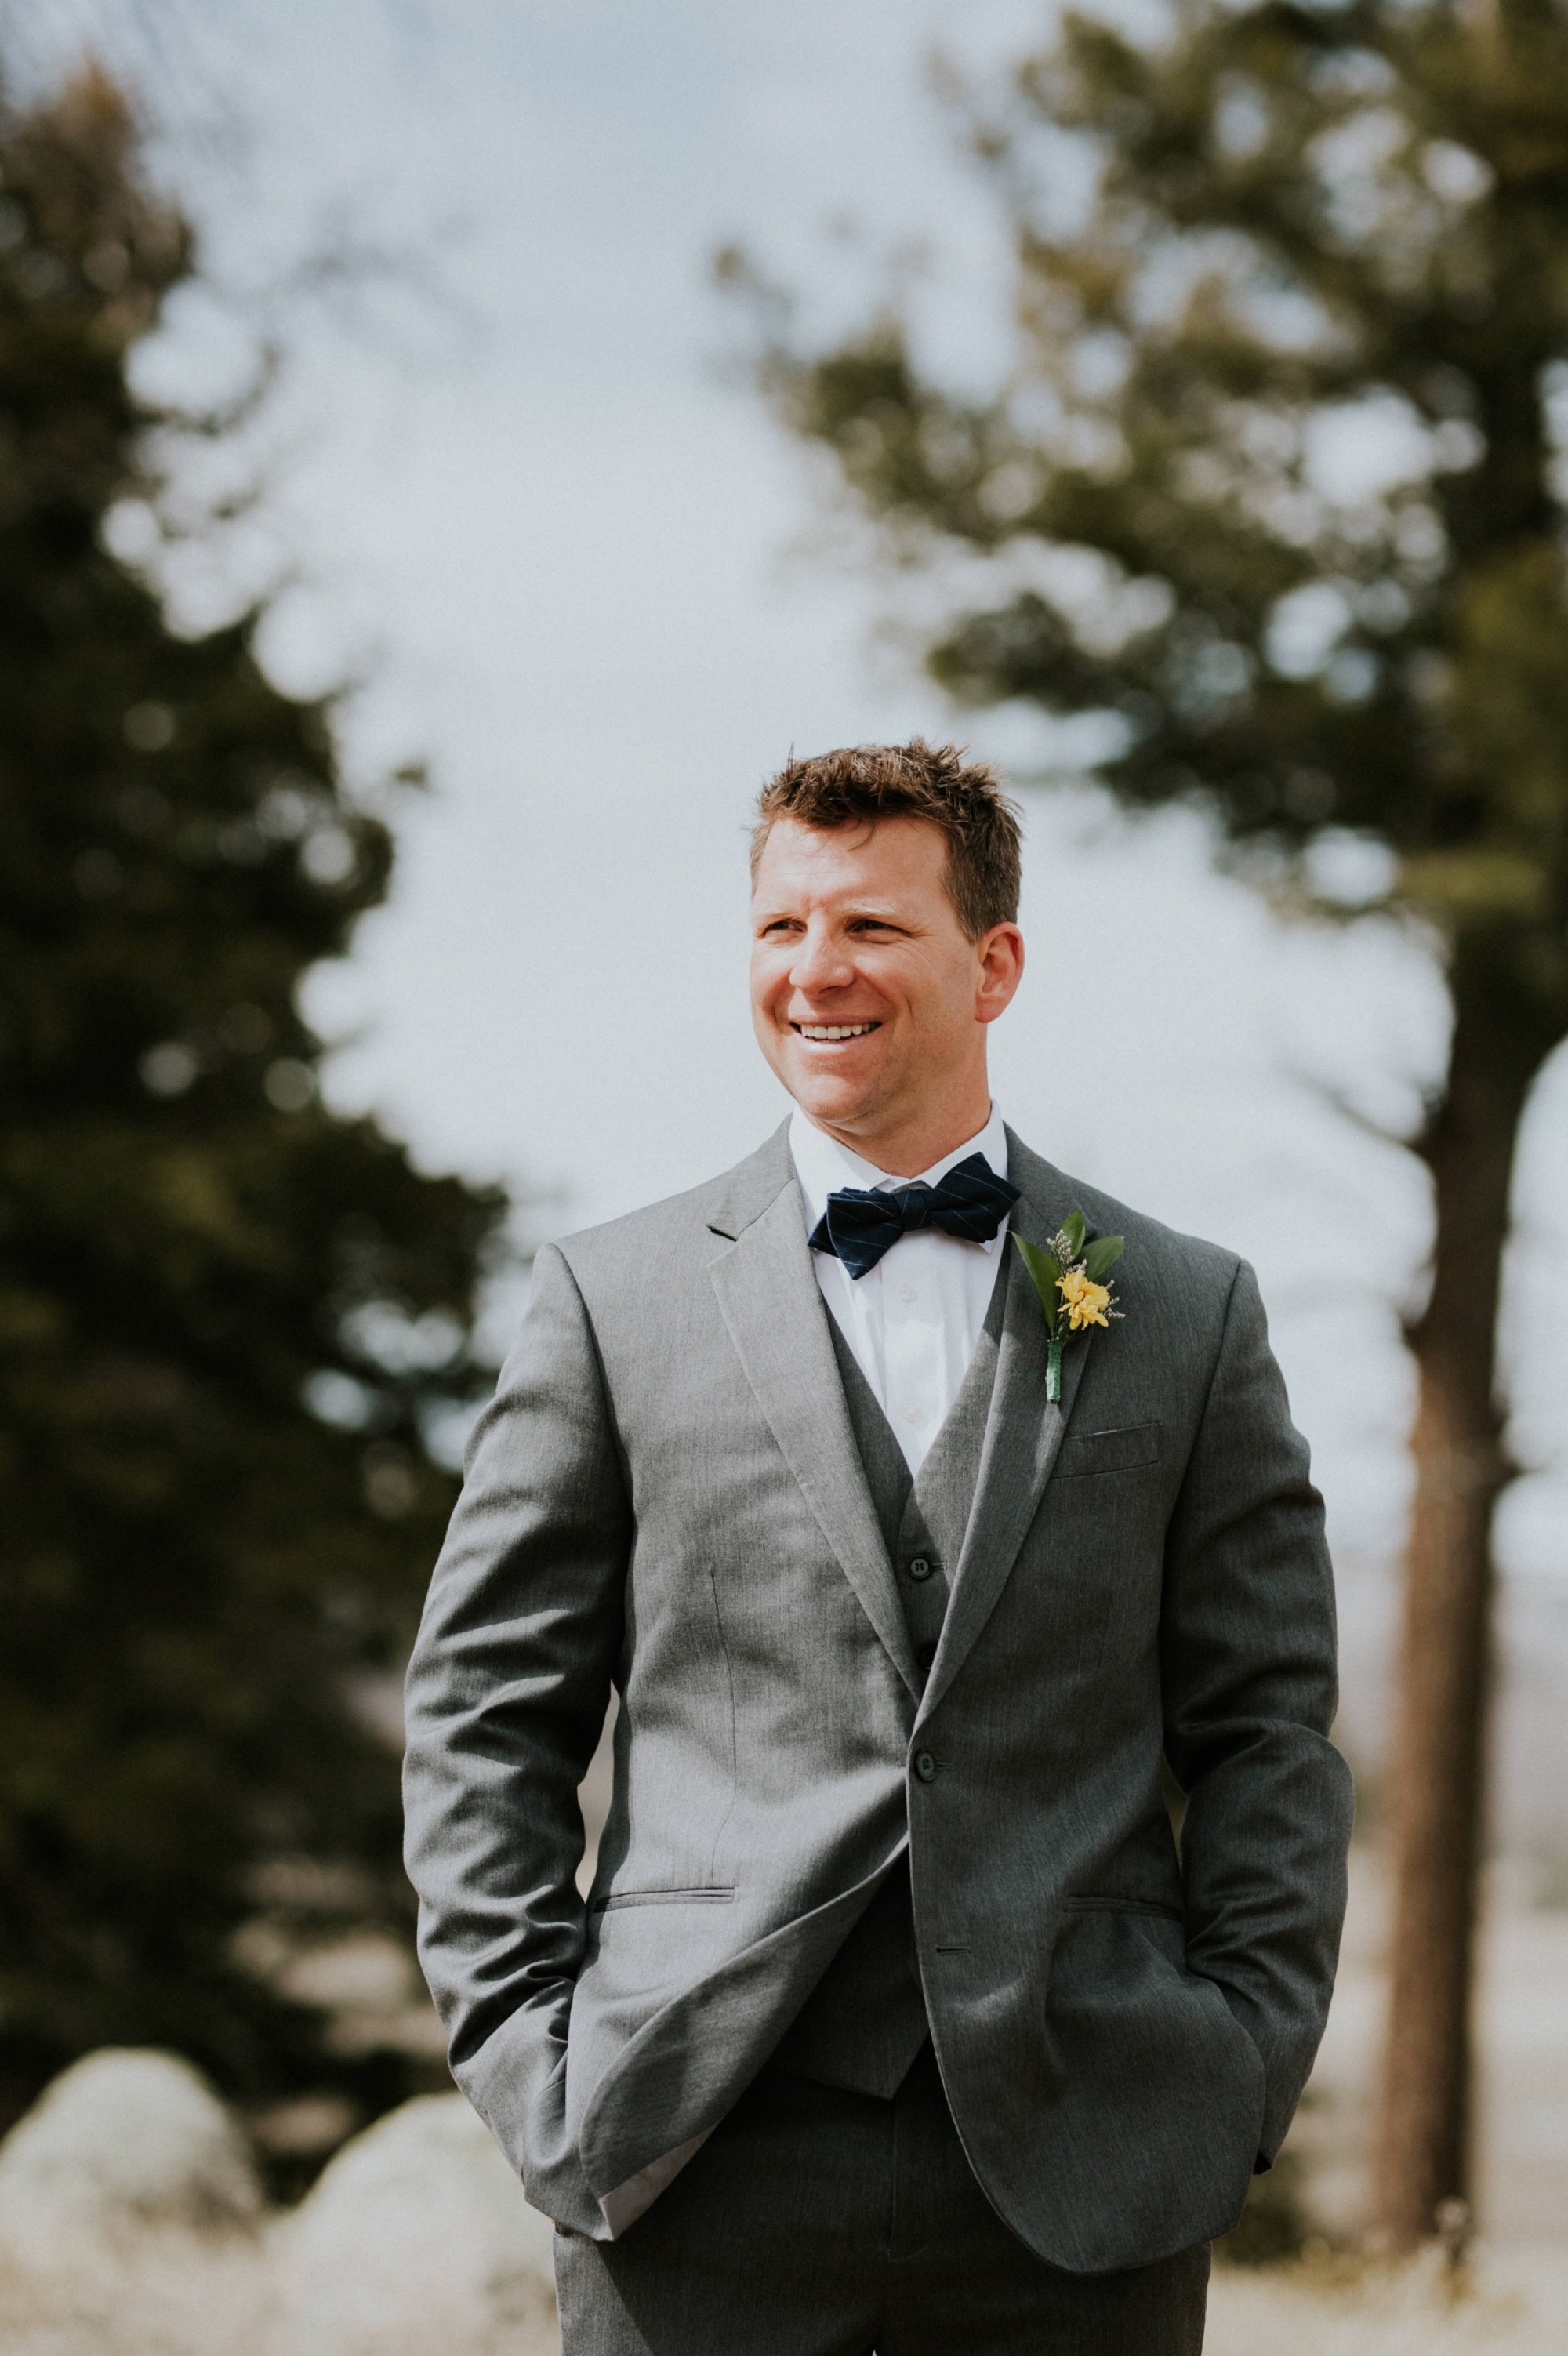  Traveling to Valles Caldera National Preserve outside of Jemez Springs, New Mexico to capture Lacey and Patrick’s New Mexico elopement was incredible! Their intimate ceremony overlooked the breathtaking landscape of Valles Caldera National Preserve 